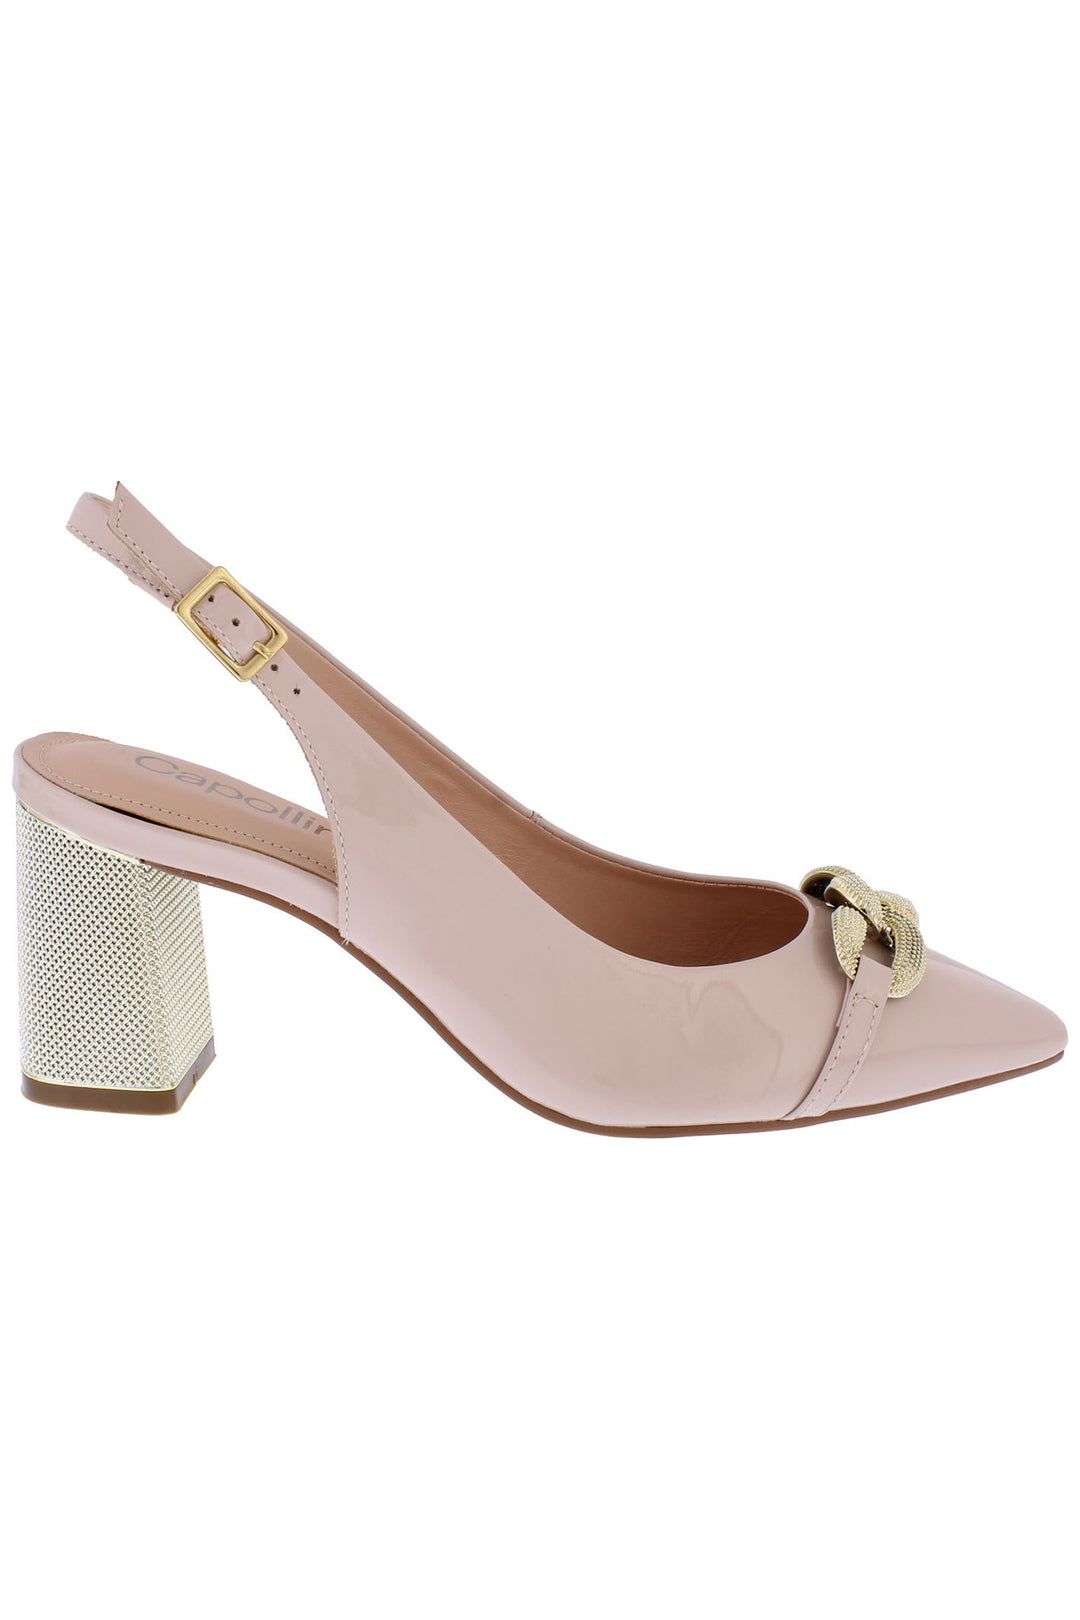 Capollini C108 Mazy Nude Pink Patent Chain Sling Shoes - Dotique